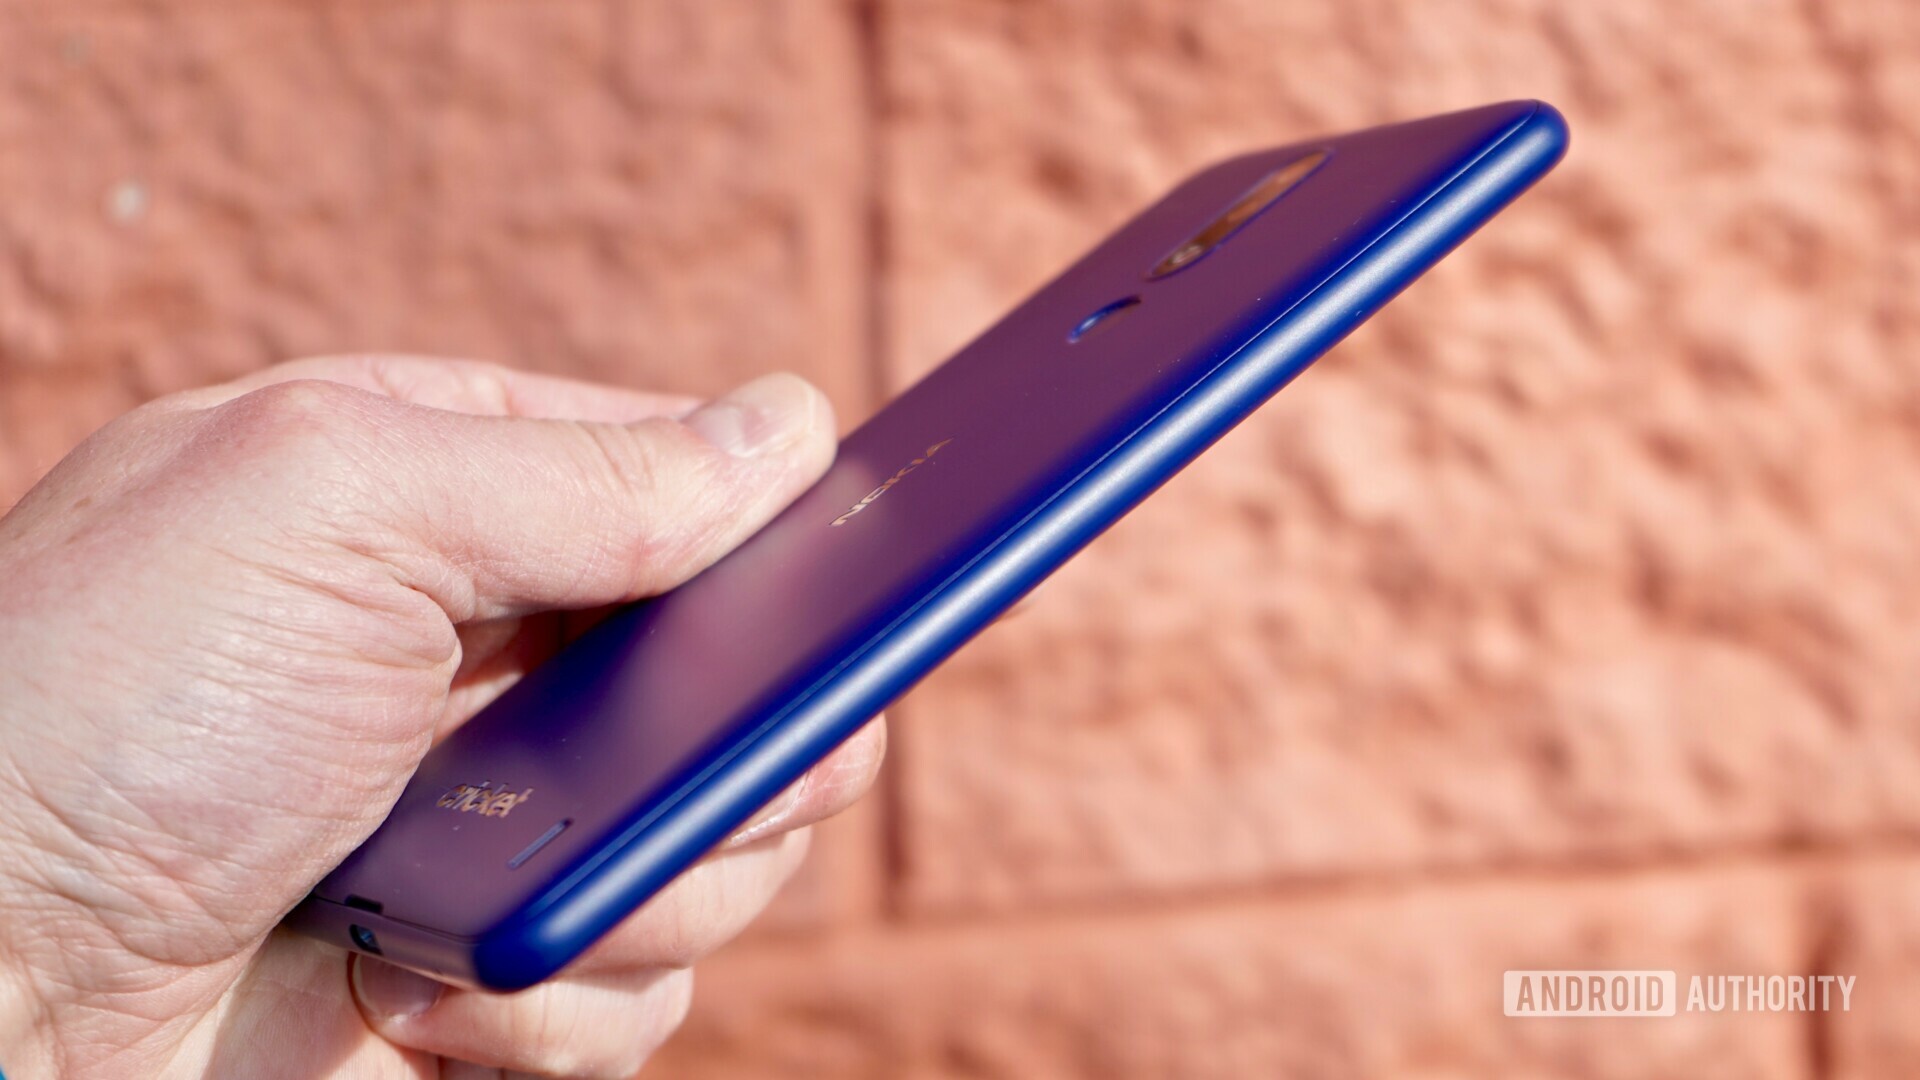 Right side view of the Blue Nokia 3.1 Plus held in a hand.